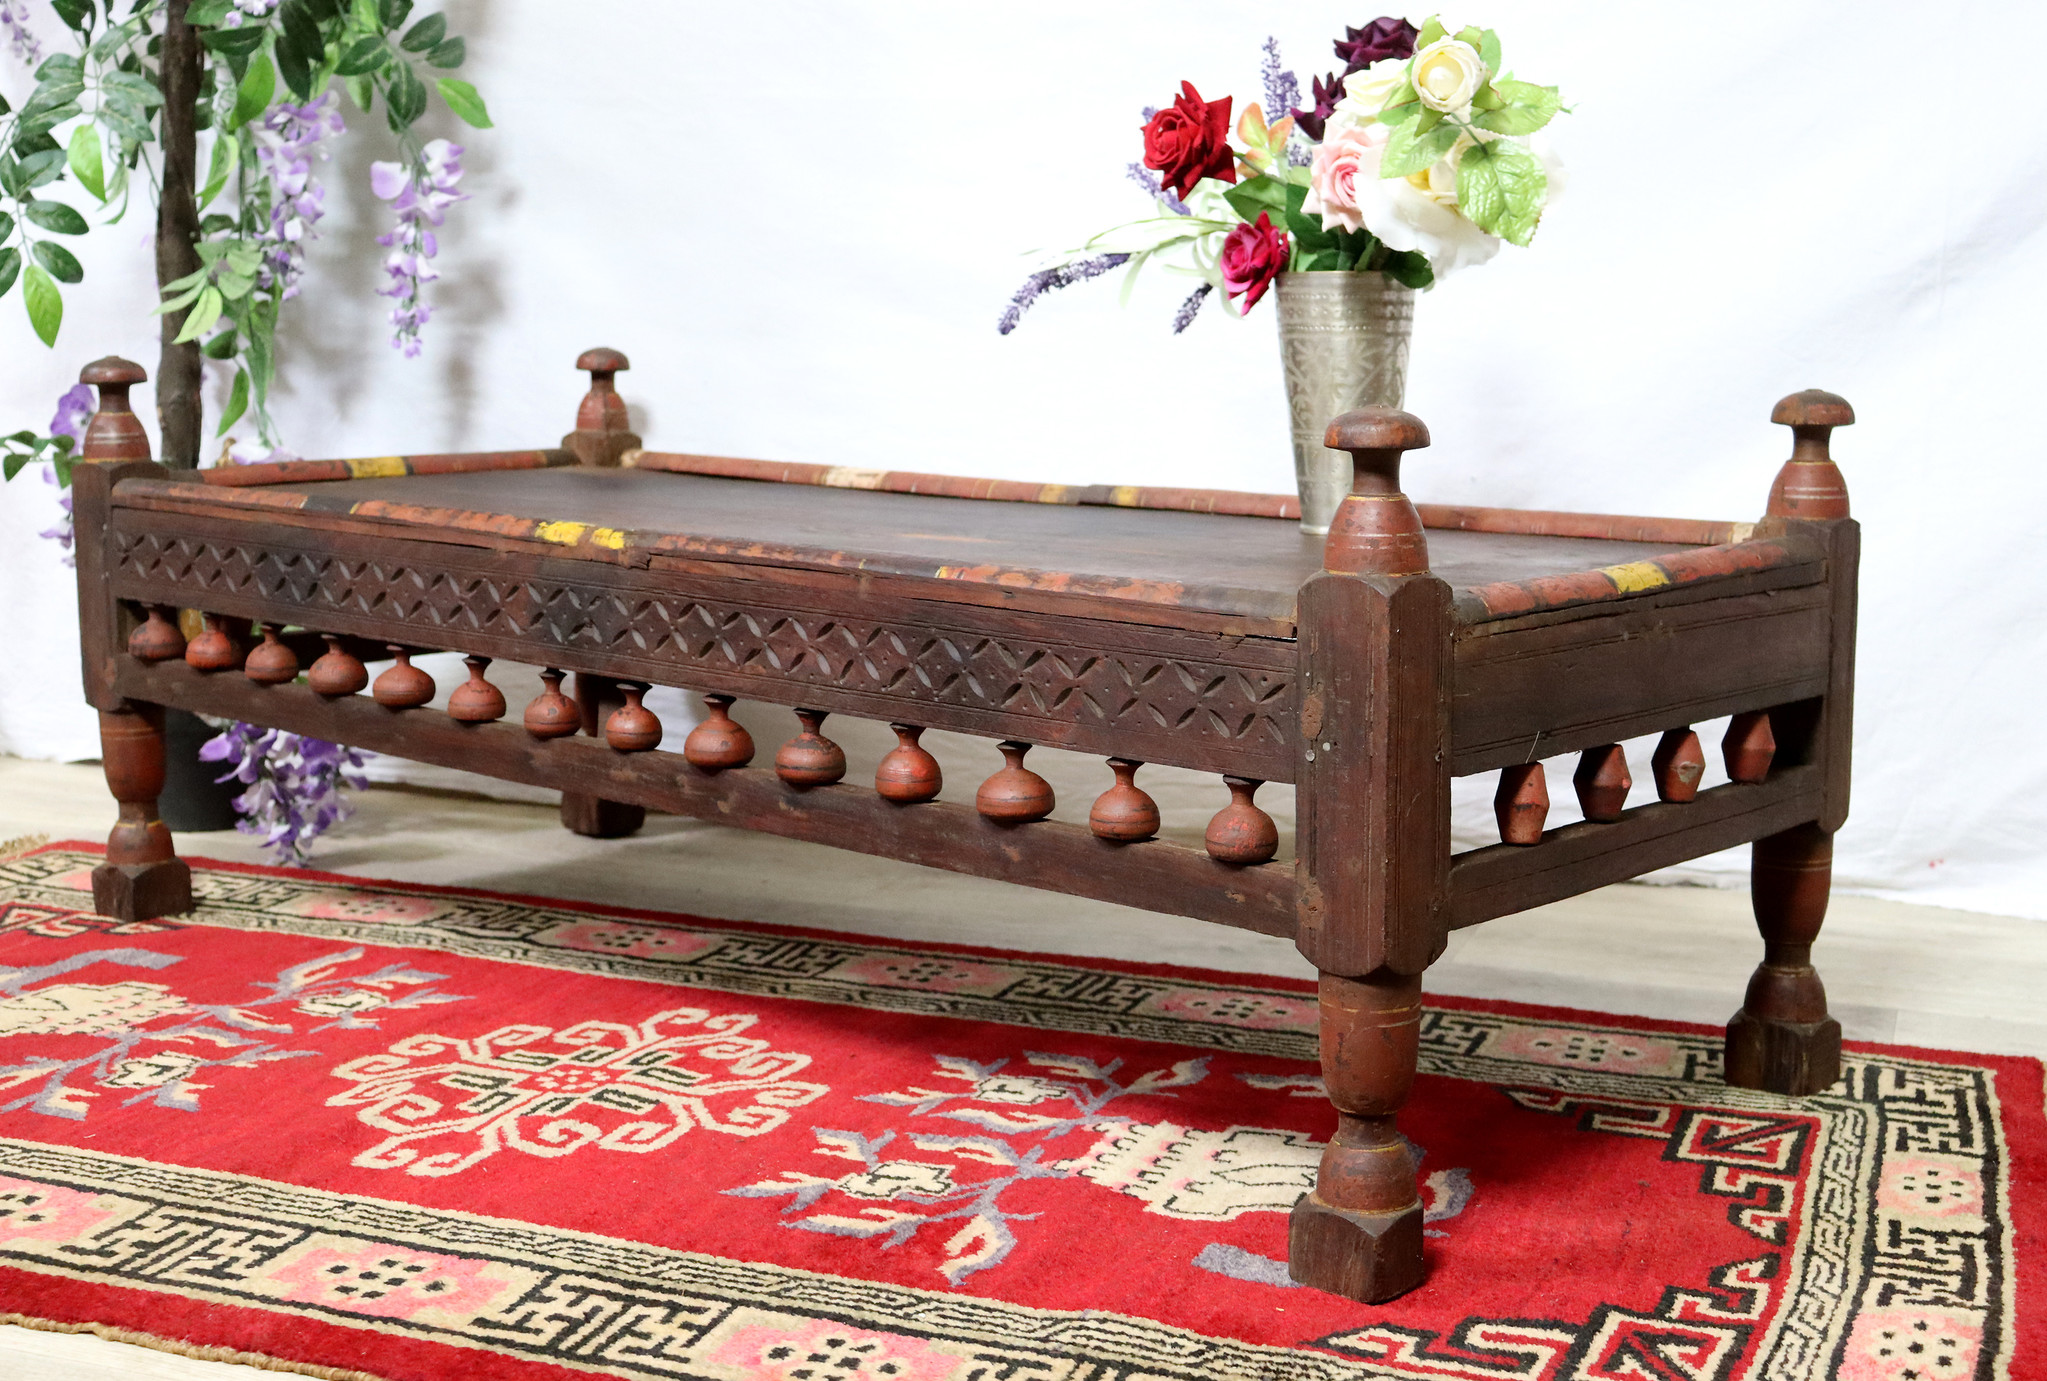 120x54 cm rare Antique solid wood orient tea table sidtable coffee table living roomtable from  Pakistan 22/2